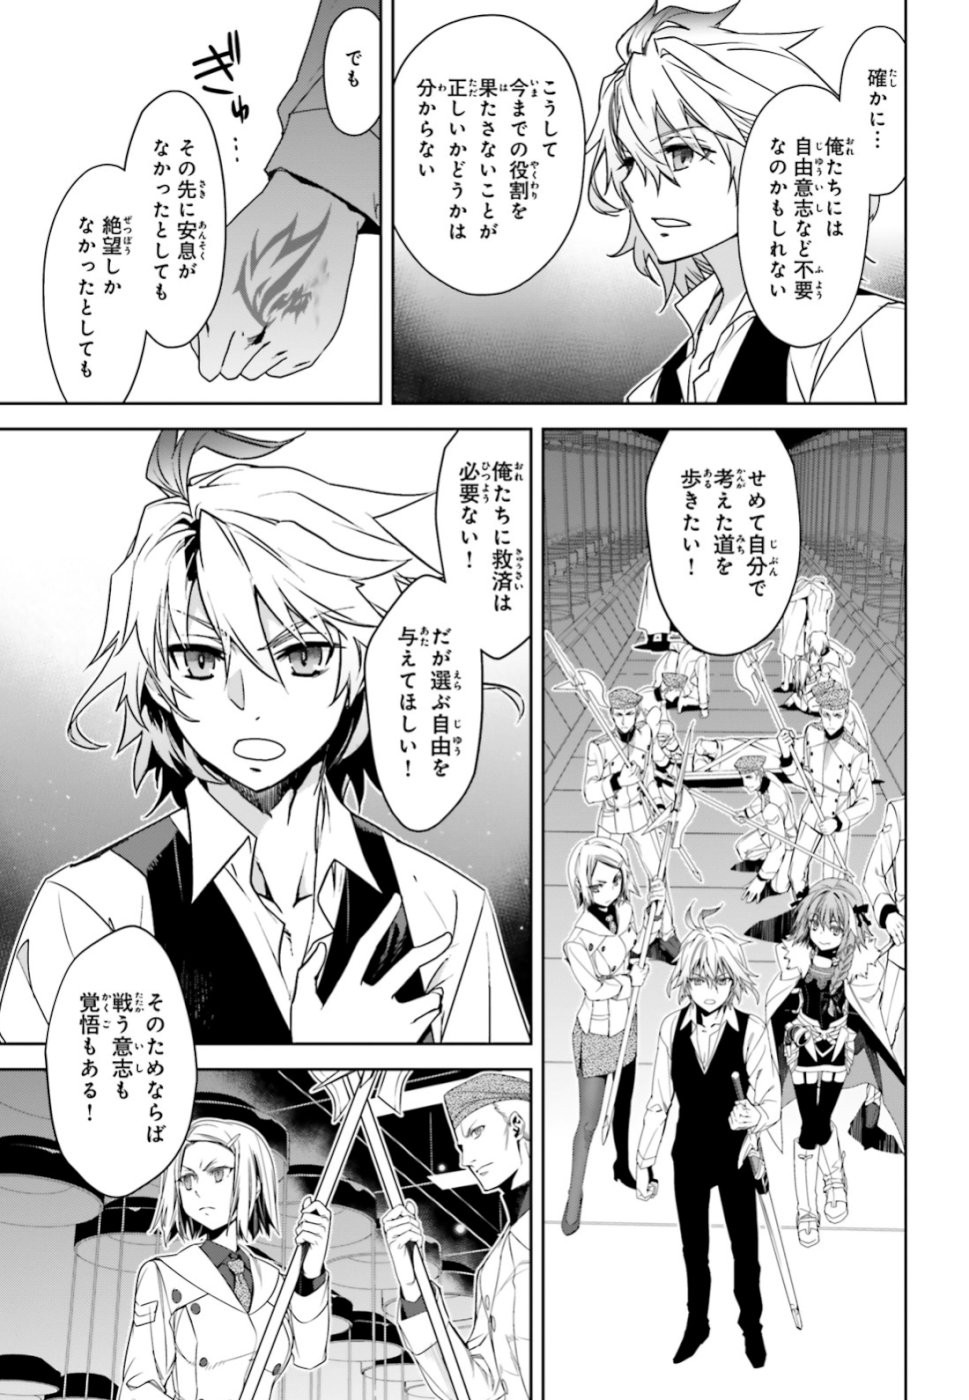 Fate-Apocrypha - Chapter 34 - Page 5